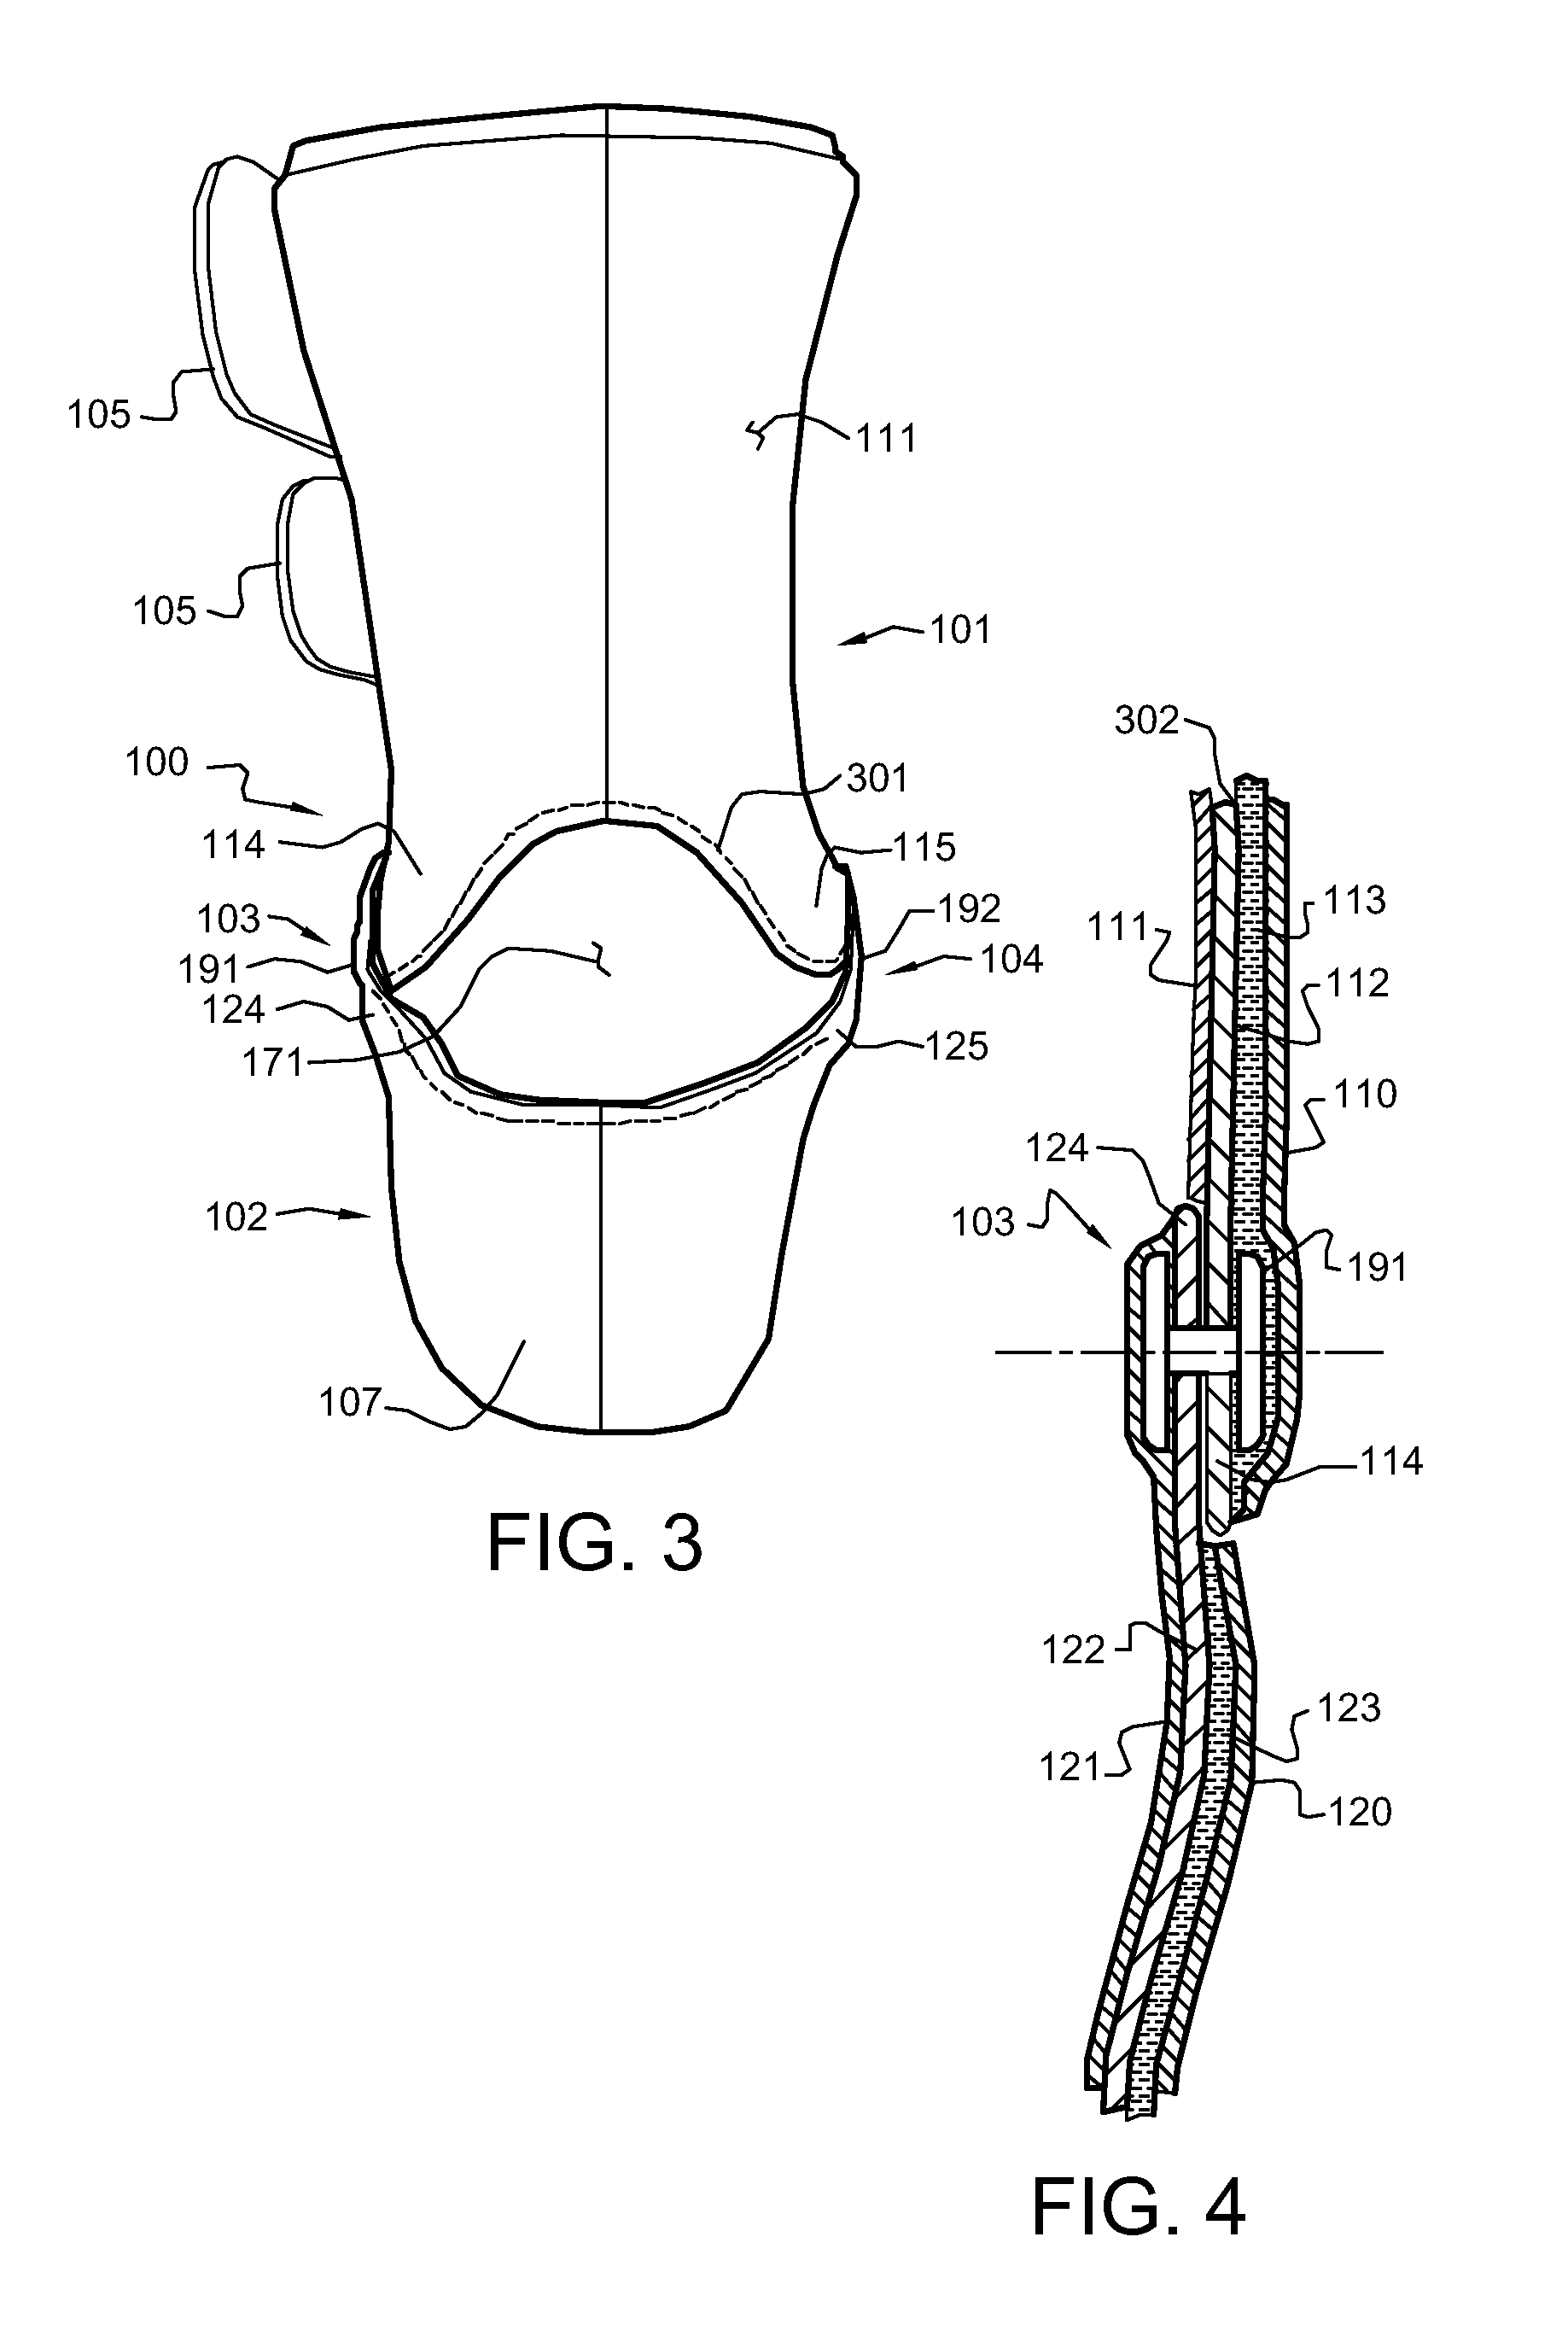 Articulated custom ankle-foot orthosis systems